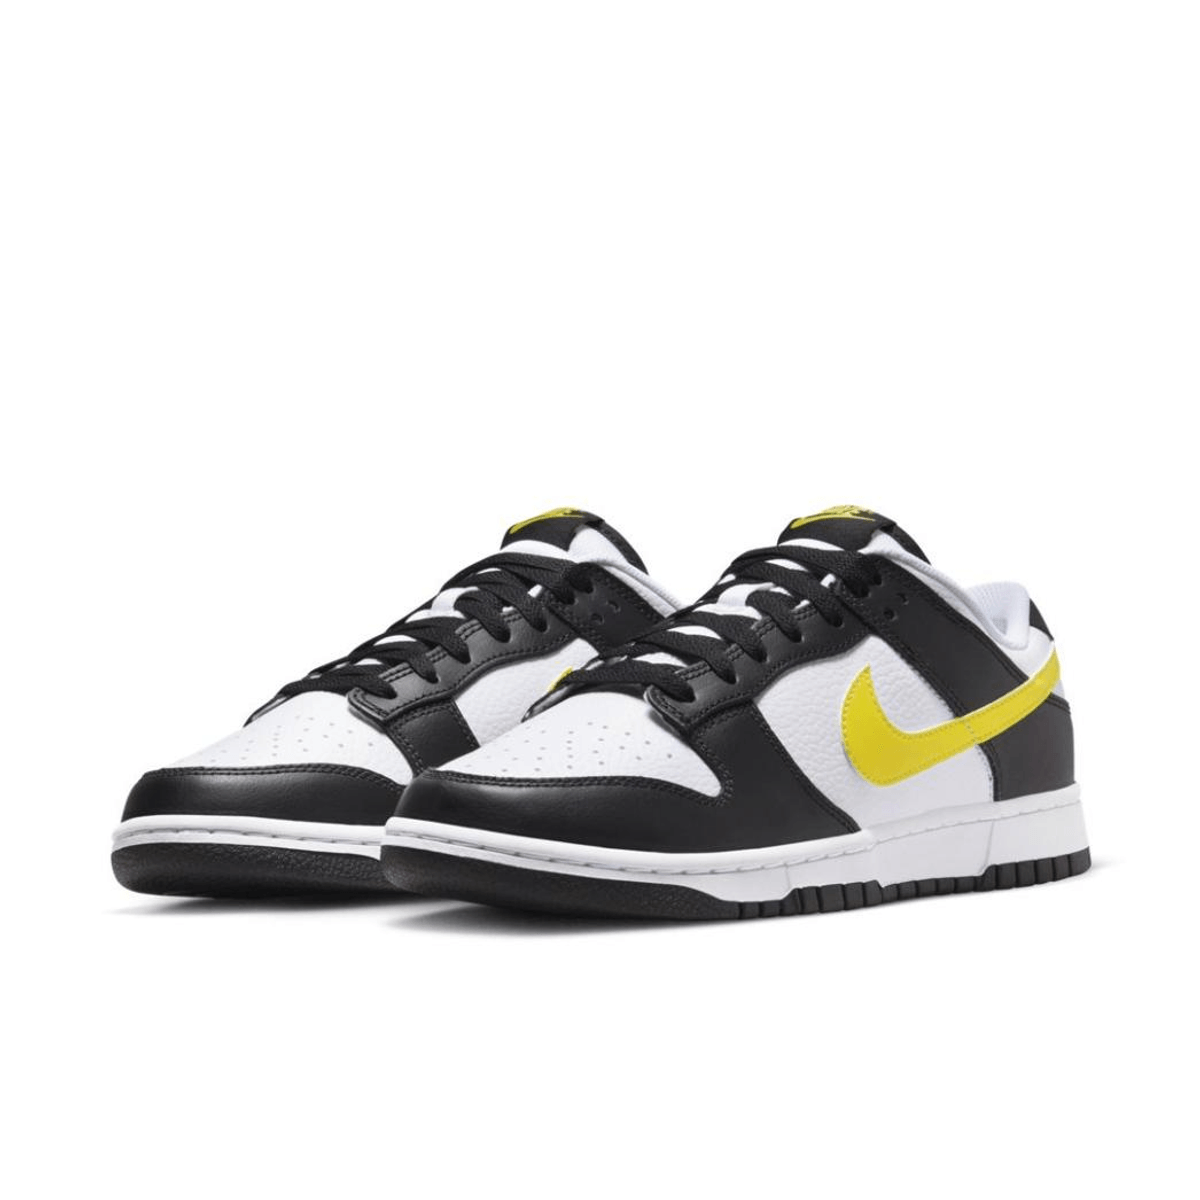 The Nike Dunk Low Black/Yellow Is Sure To Generate A Buzz